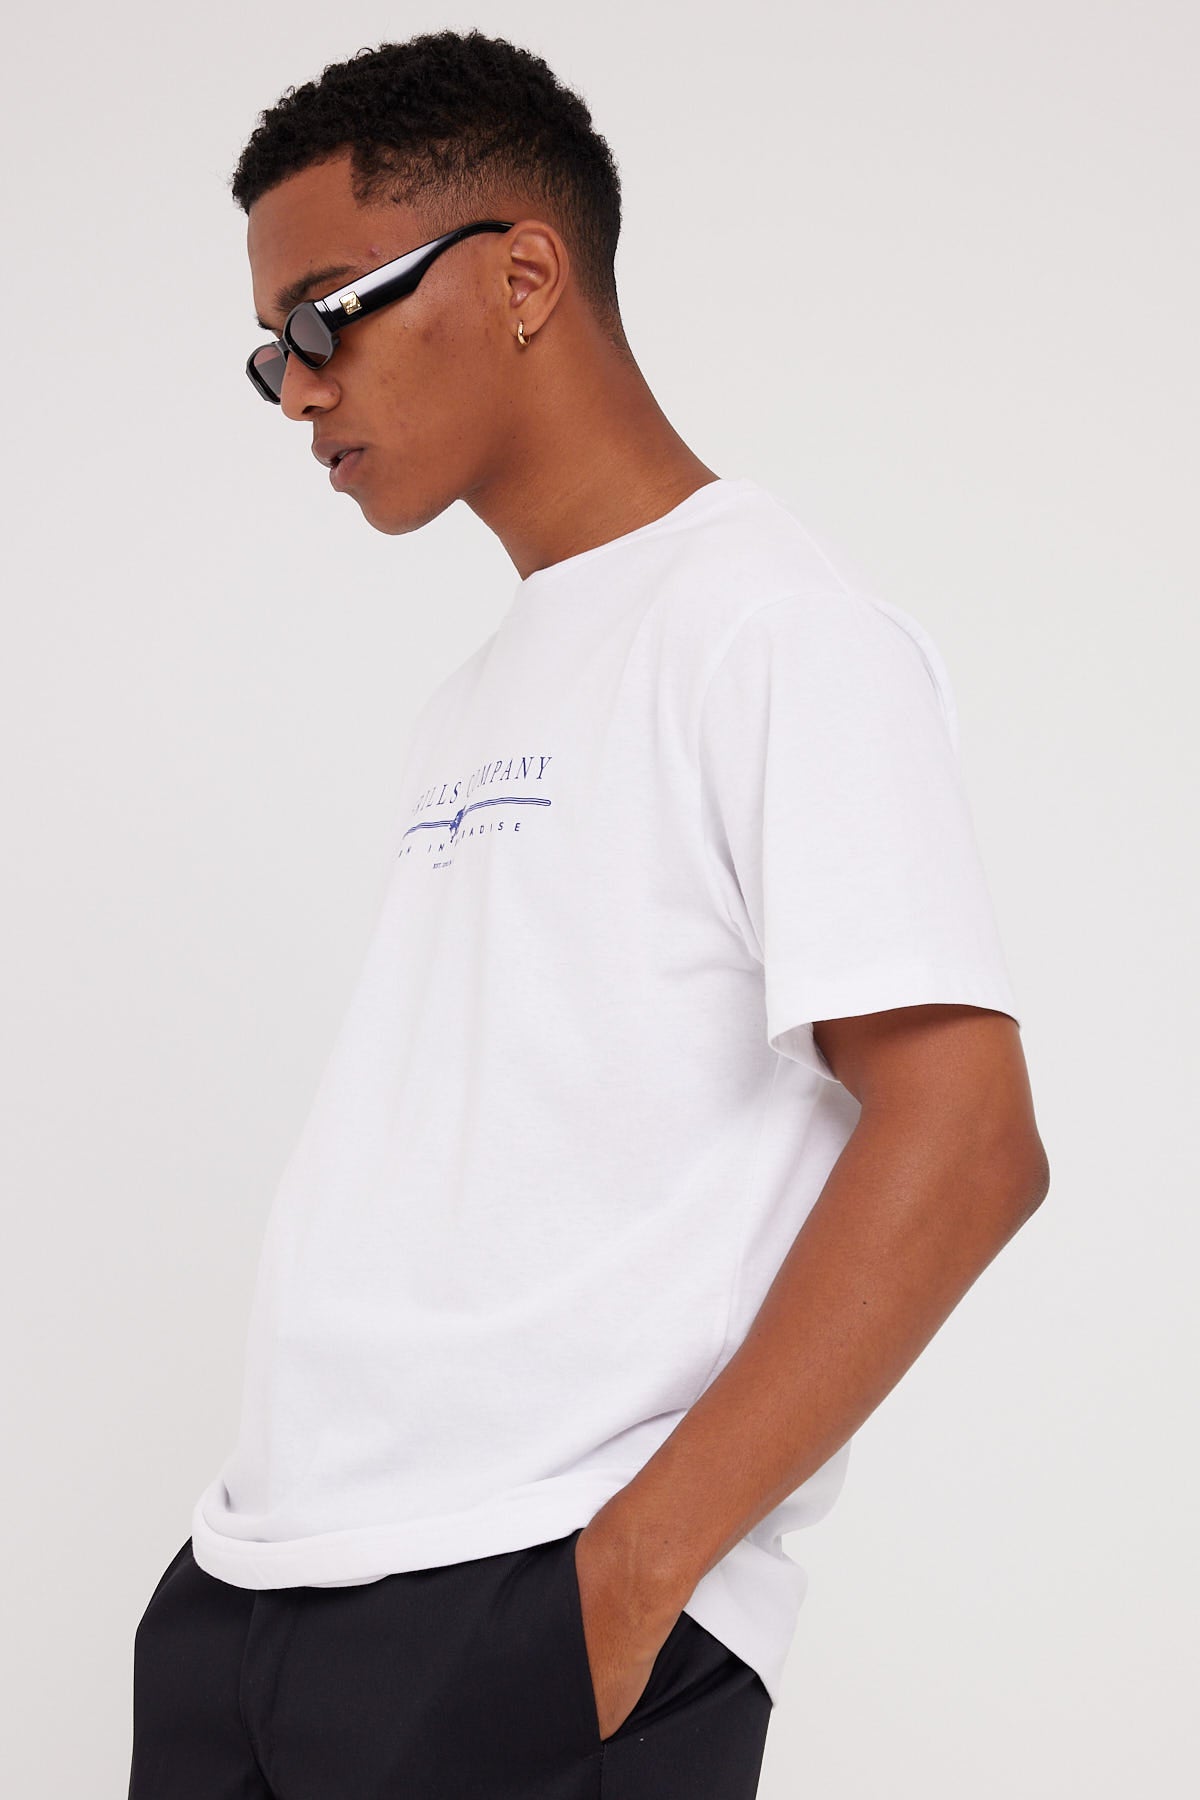 Thrills One For All Merch Fit Tee White